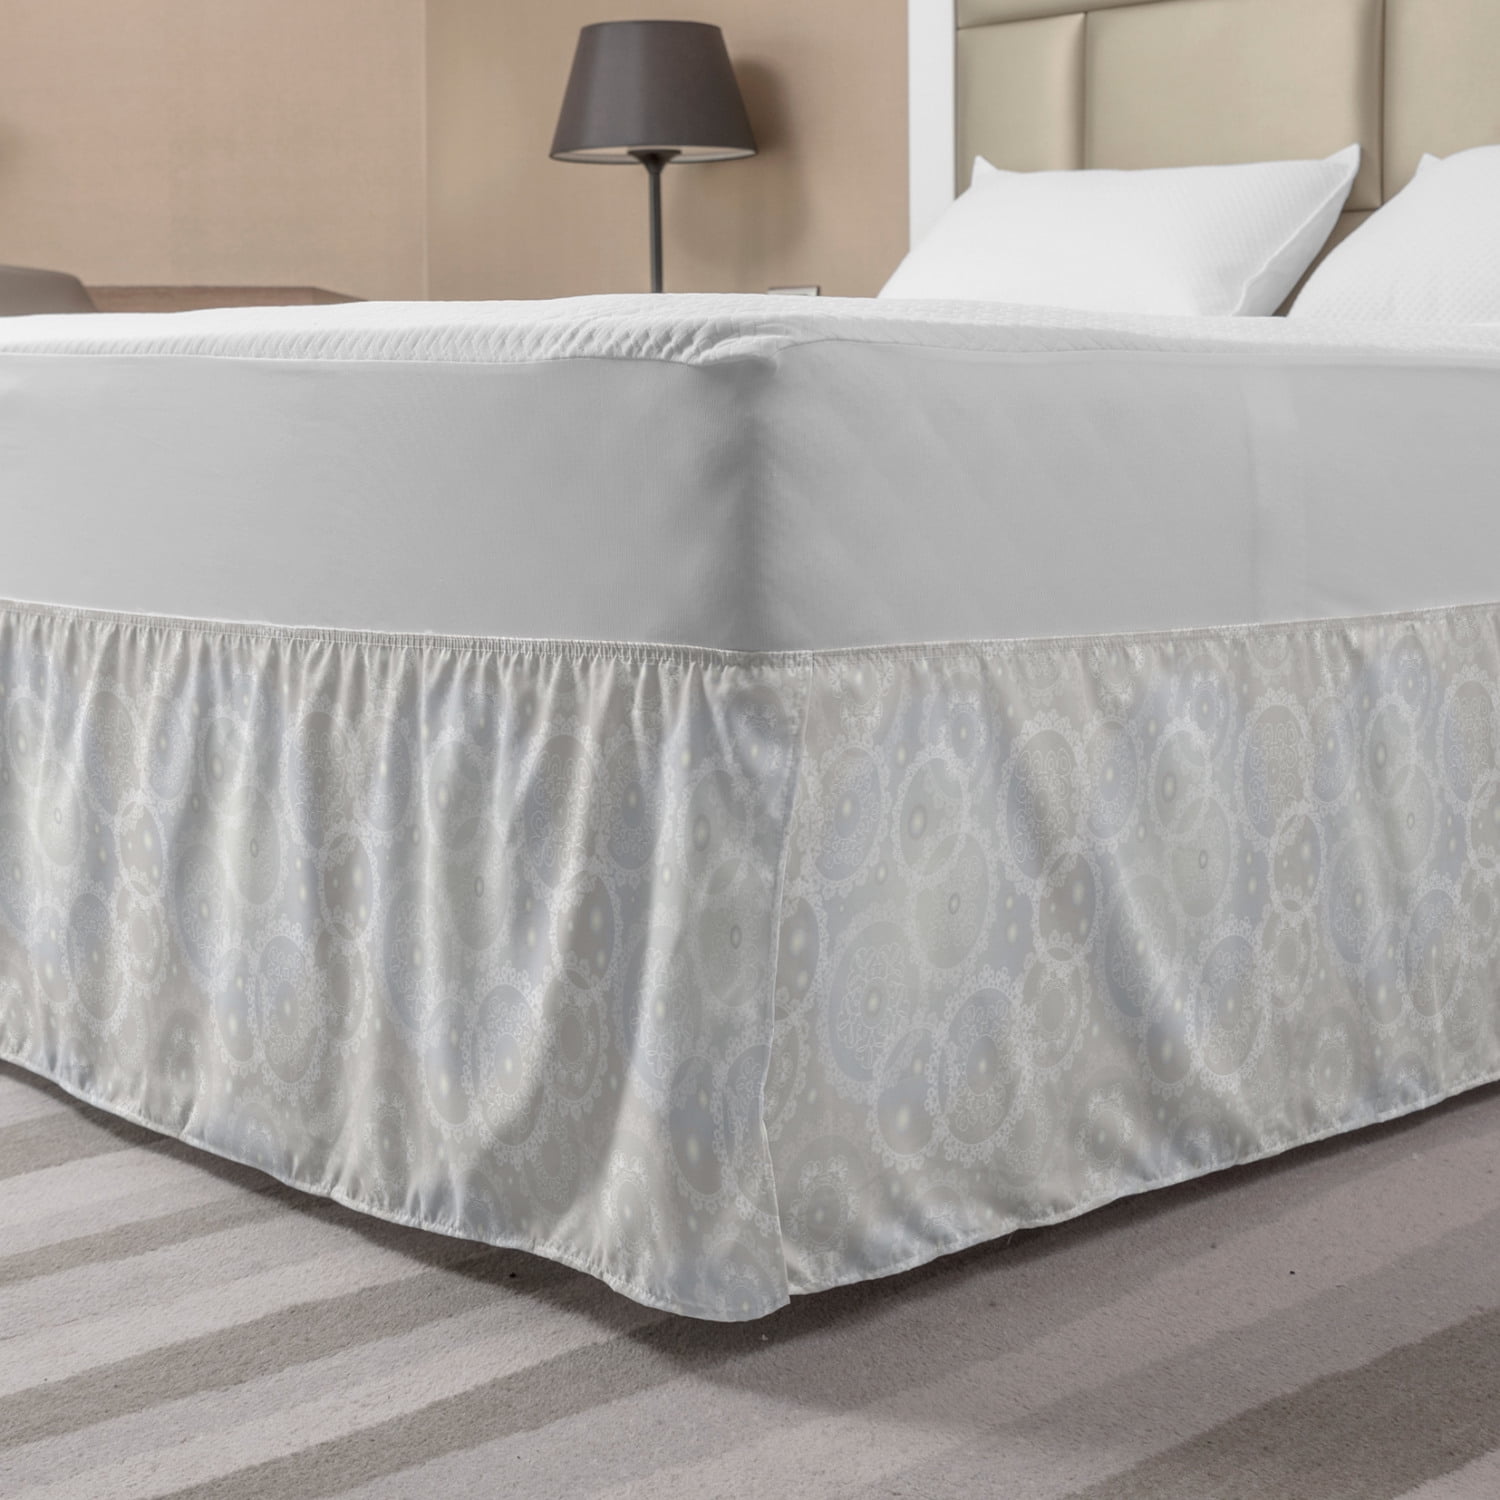 Linen Shoppe Furniture Row essentials Twin Size Bed skirt Microfiber Grey Gray 